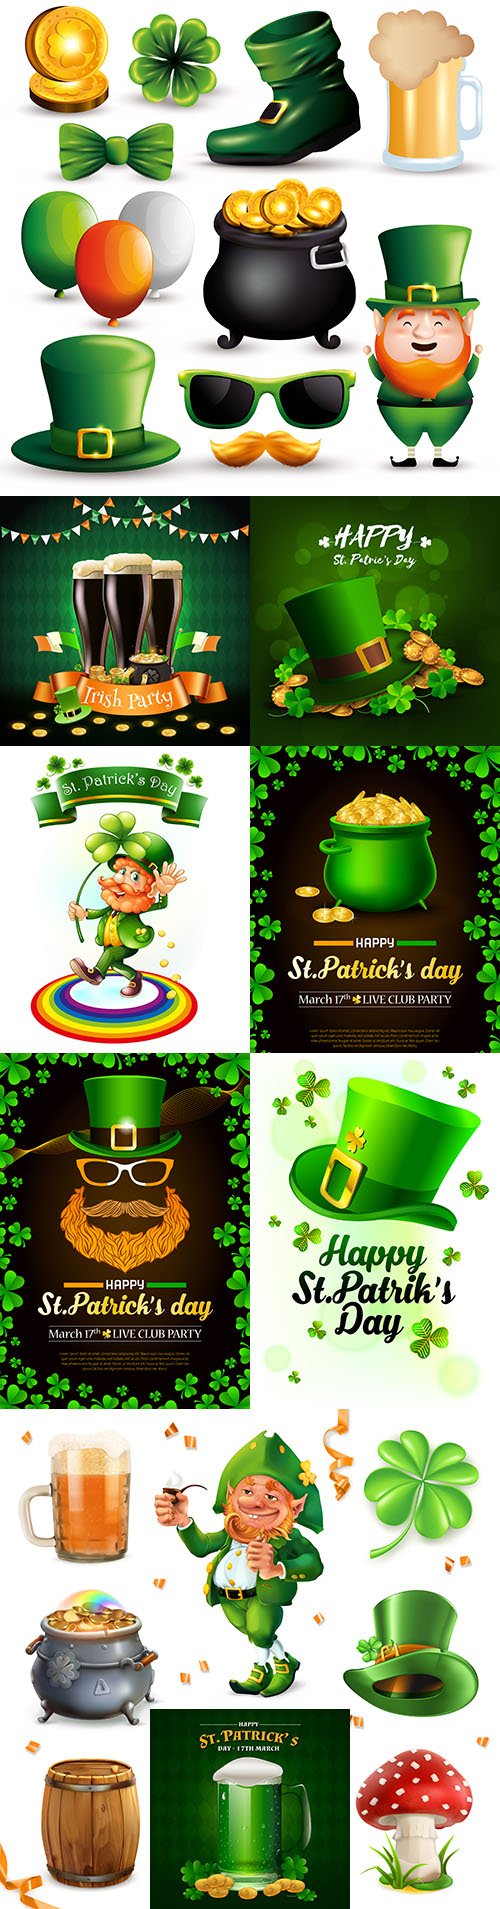 St. Patrick's realistic collelection vector illustrations